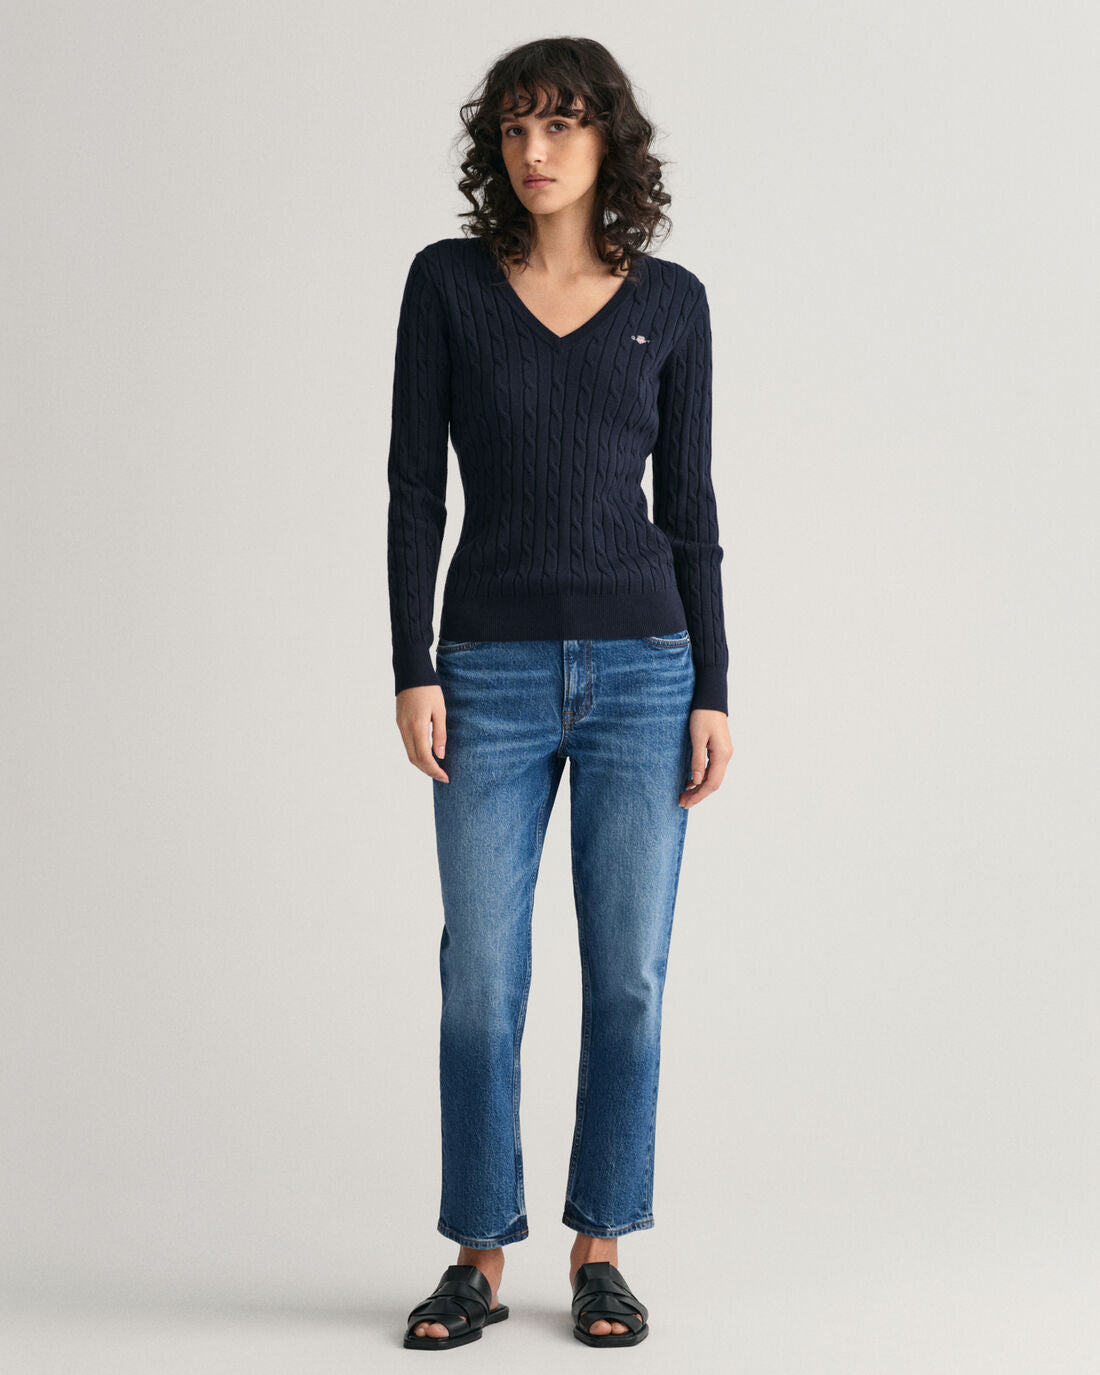 Gant, the Stretch Cotton Cable V-Neck